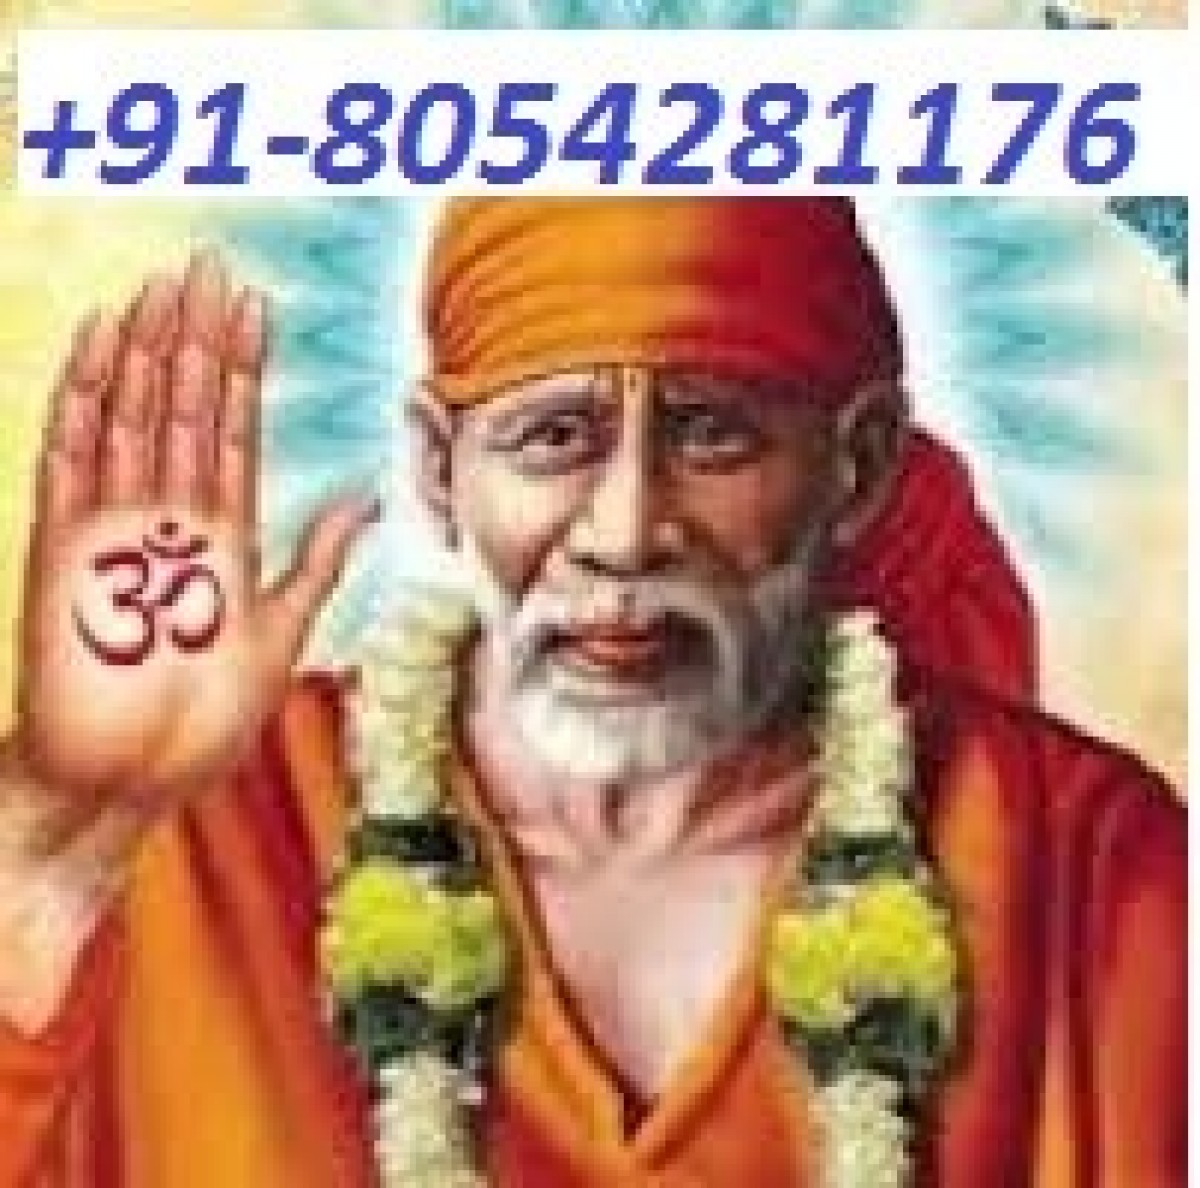 Get Your Lost Love Back By SpecialistServicesAstrology - NumerologyGurgaonOm Nagar